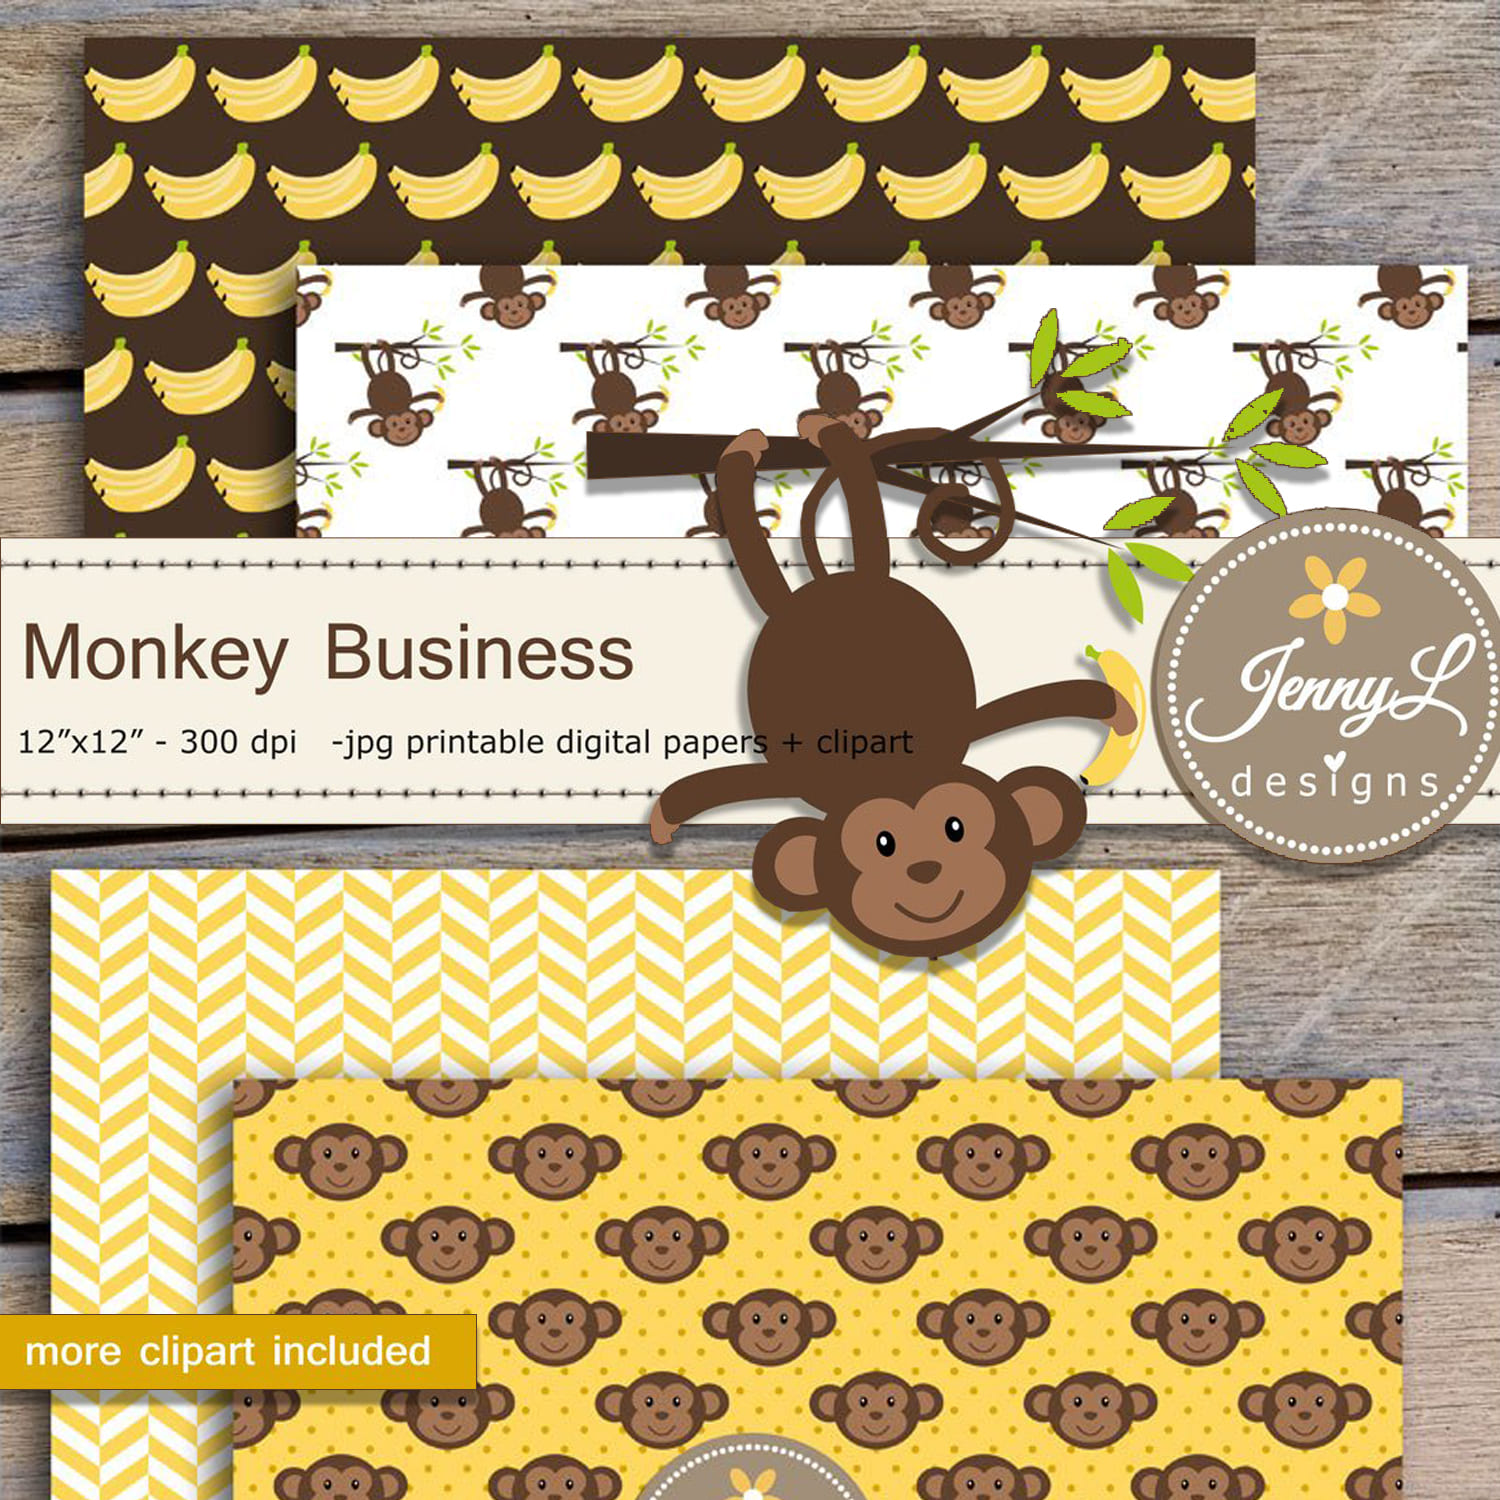 Monkey Digital Papers & Clipart cover.